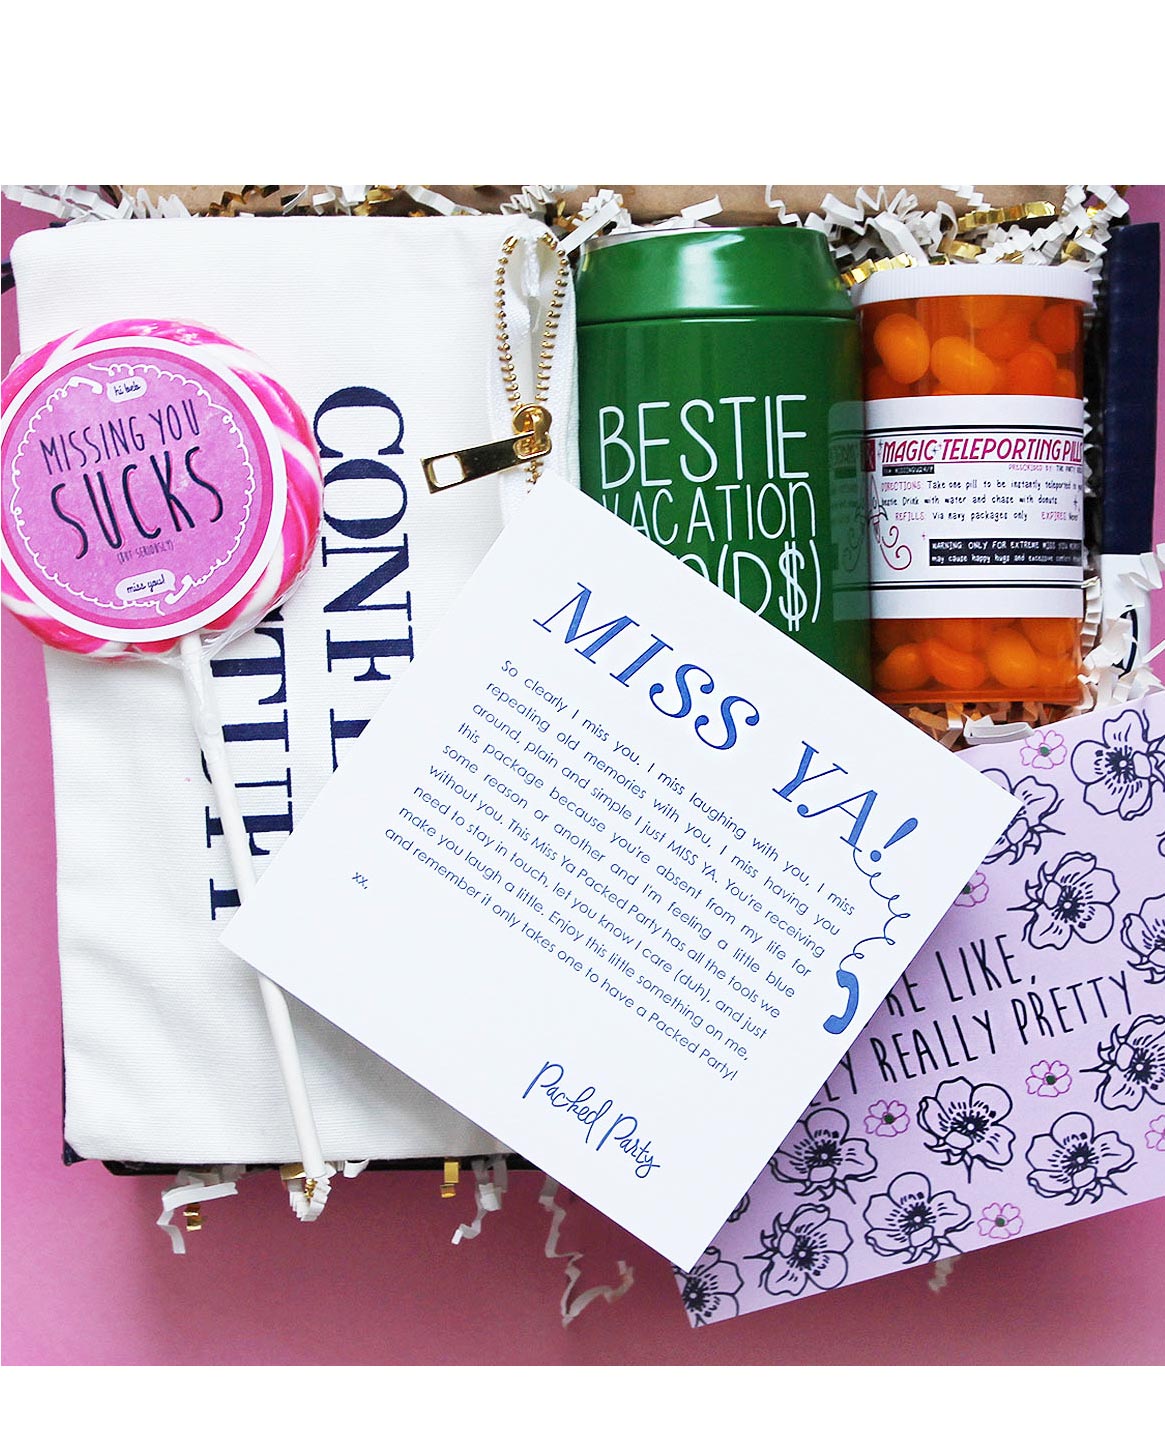 Galentine's Day Gifts for Your (Other) Soul Mate | Martha Stewart Weddings